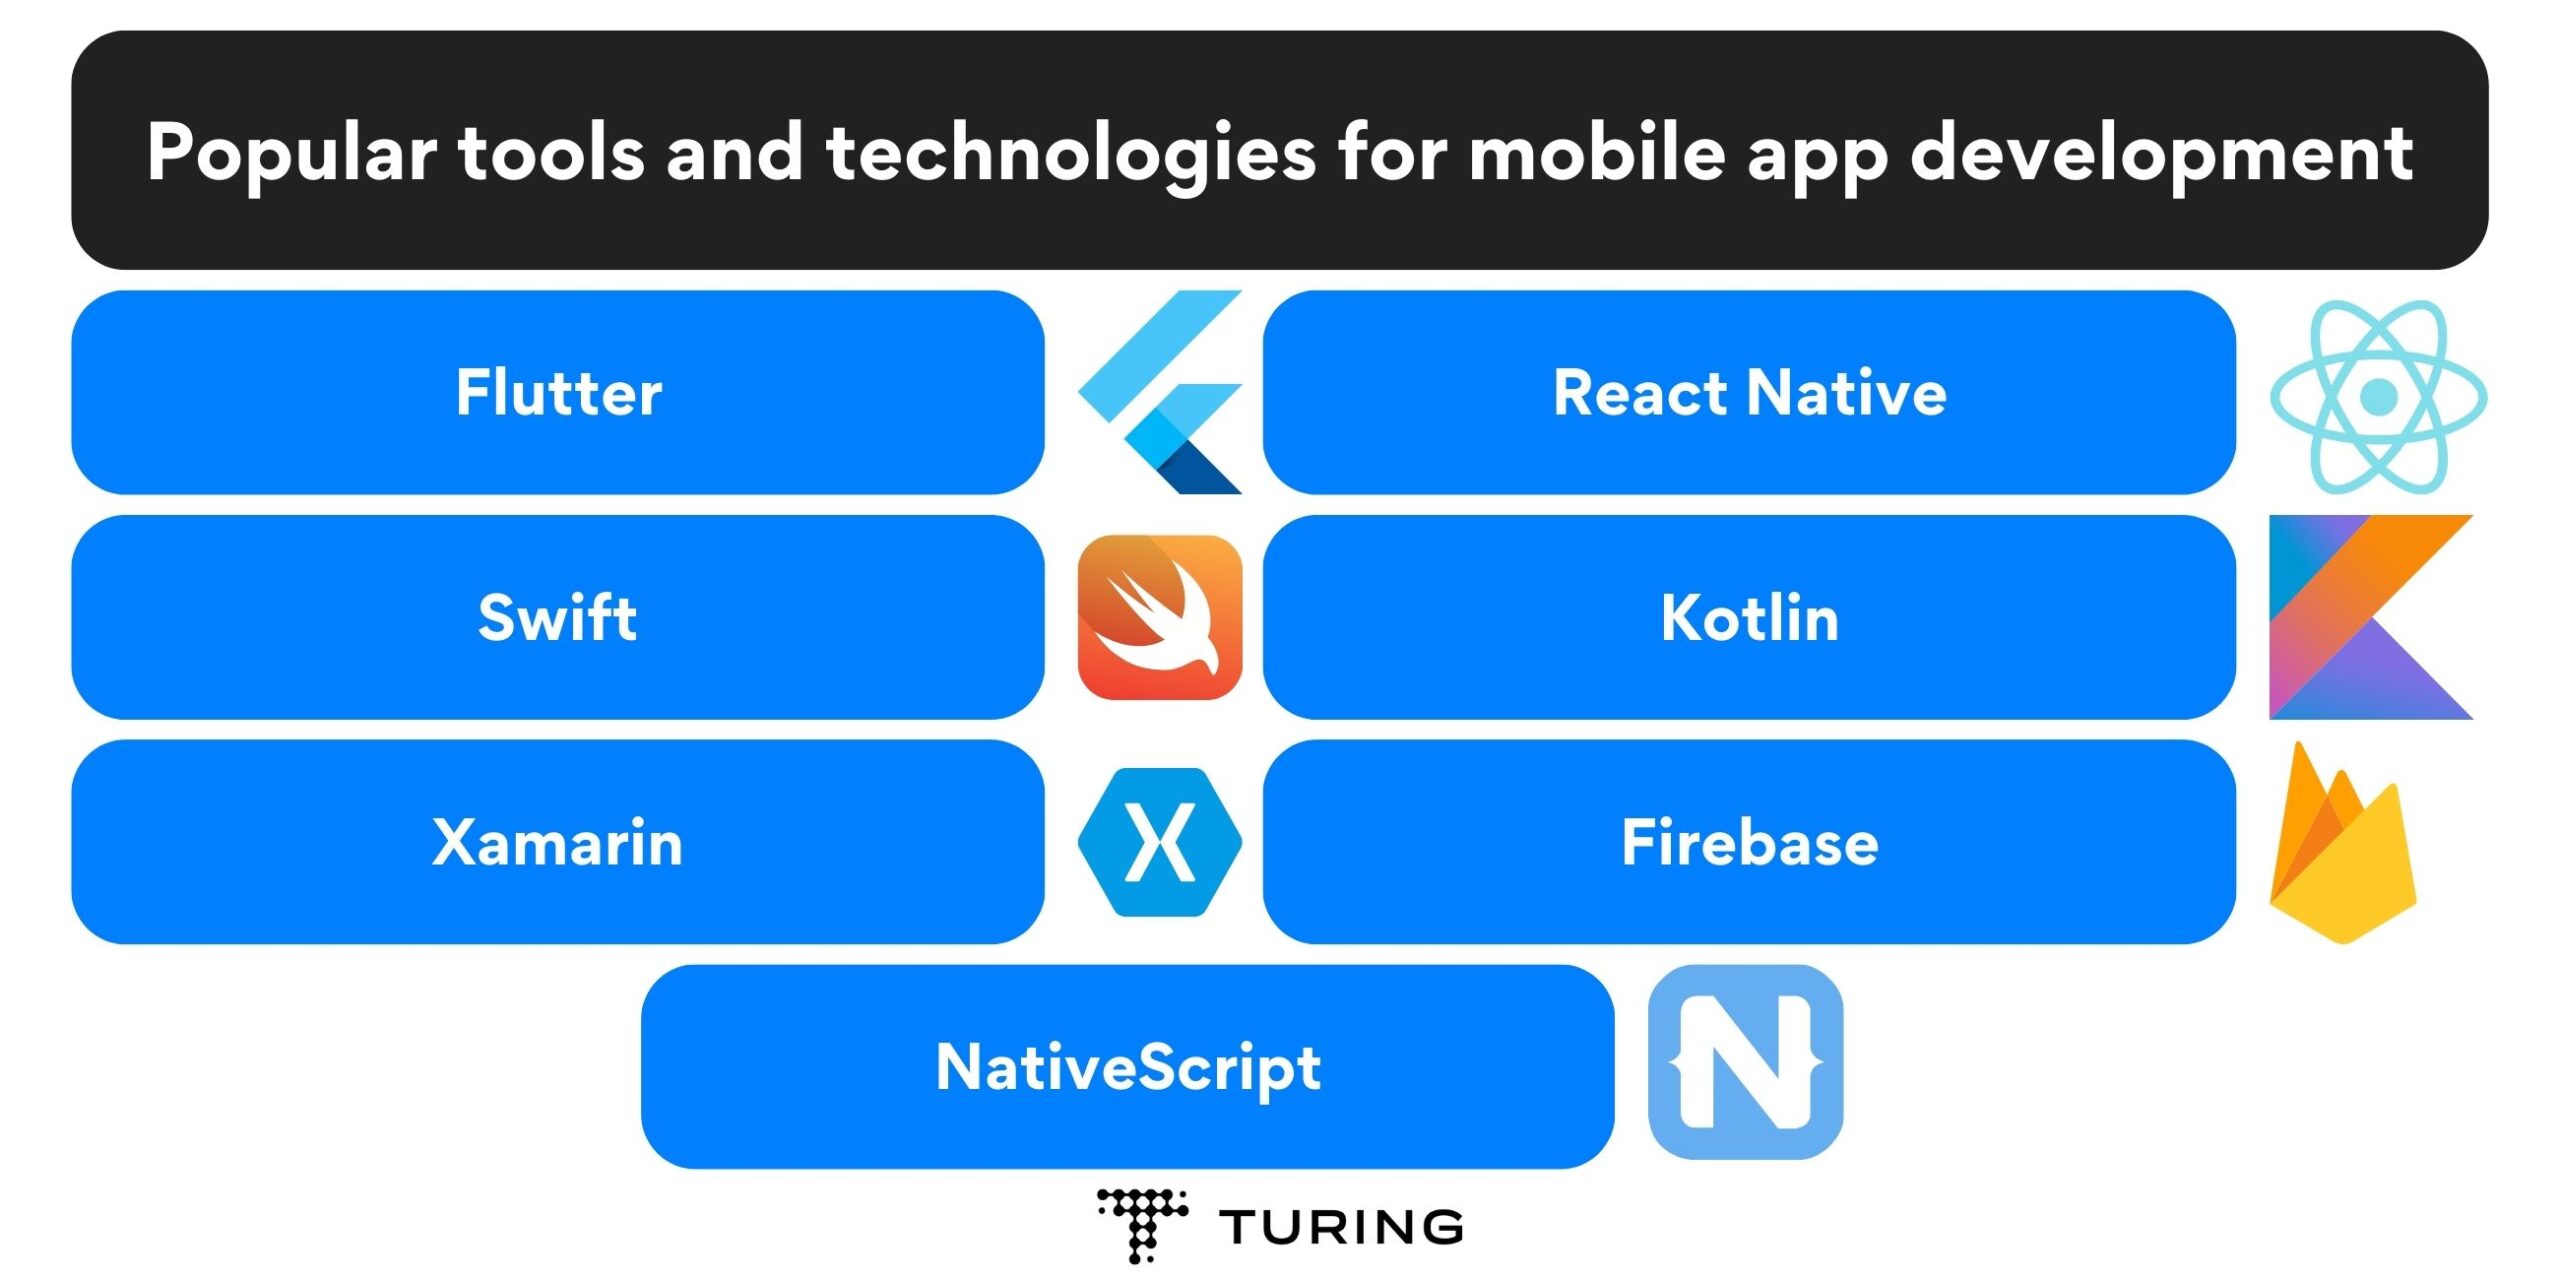 Popular tools and technologies for mobile app development